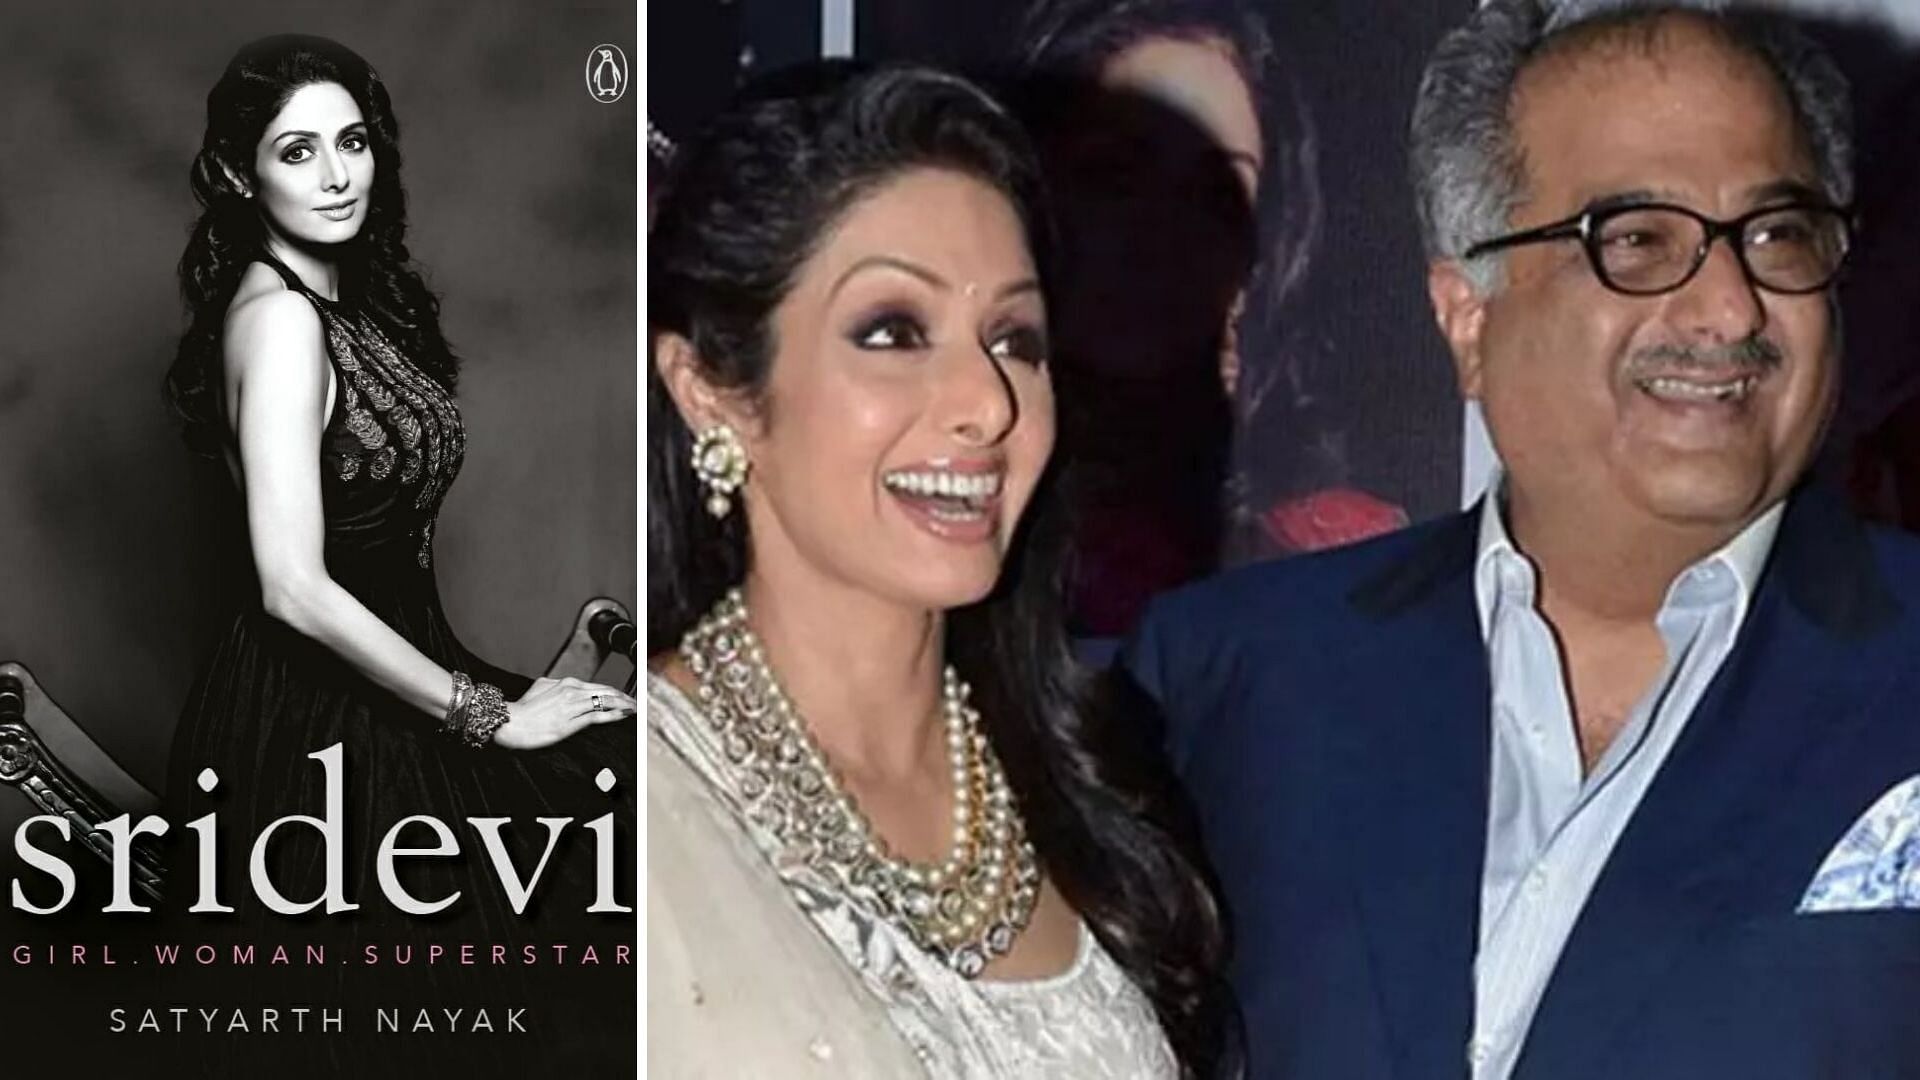 Cover of the book (L) and Boney Kapoor with late Sridevi (R)